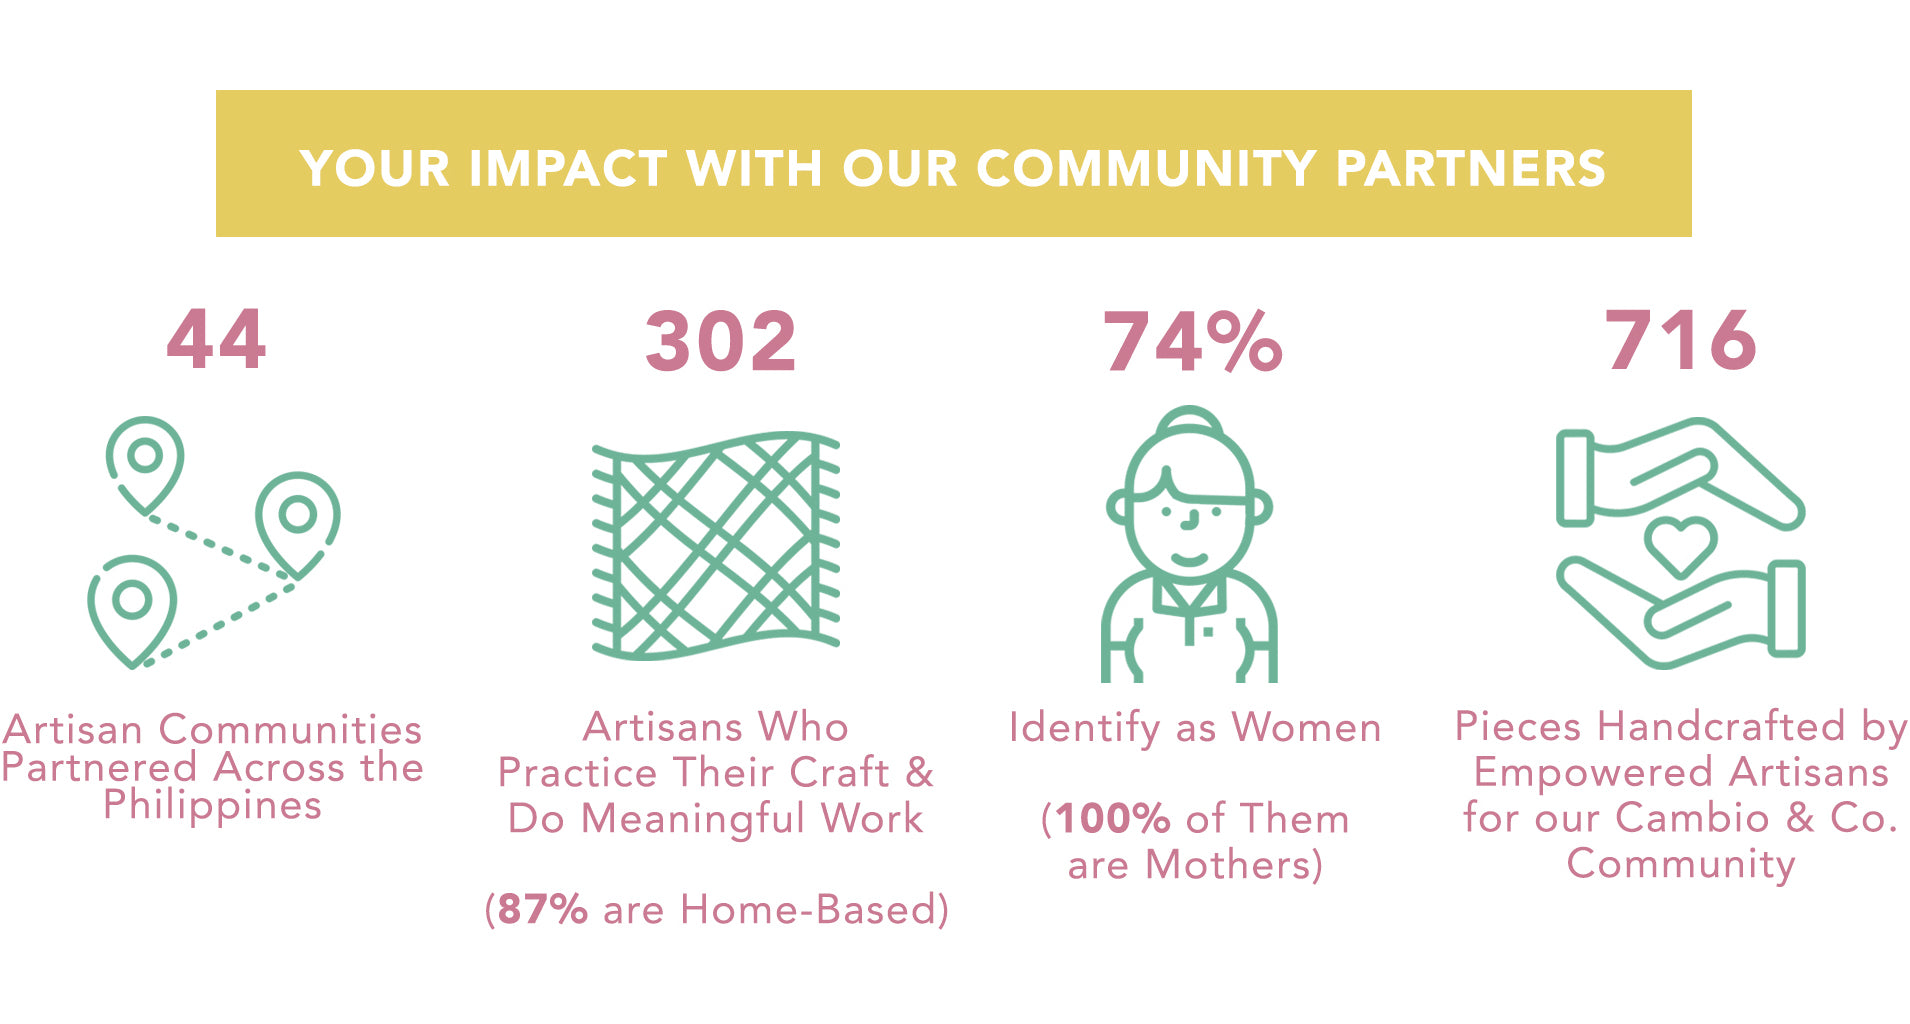 Cambio & Co. Impact with our Community Partners